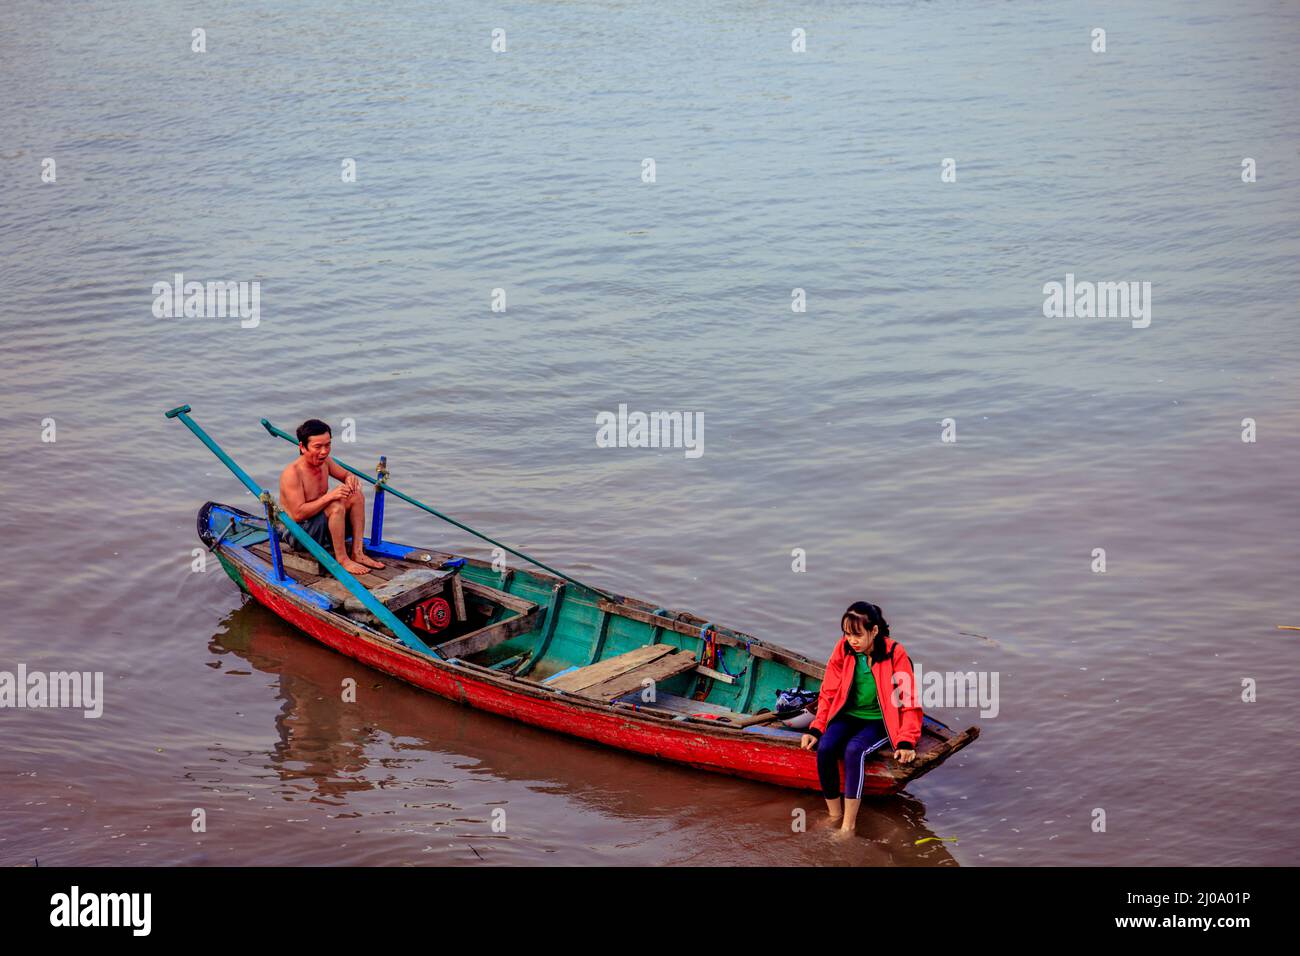 Just off the banks of the Mekong River two people sit in their wood row boat by Chau Doc. Stock Photo